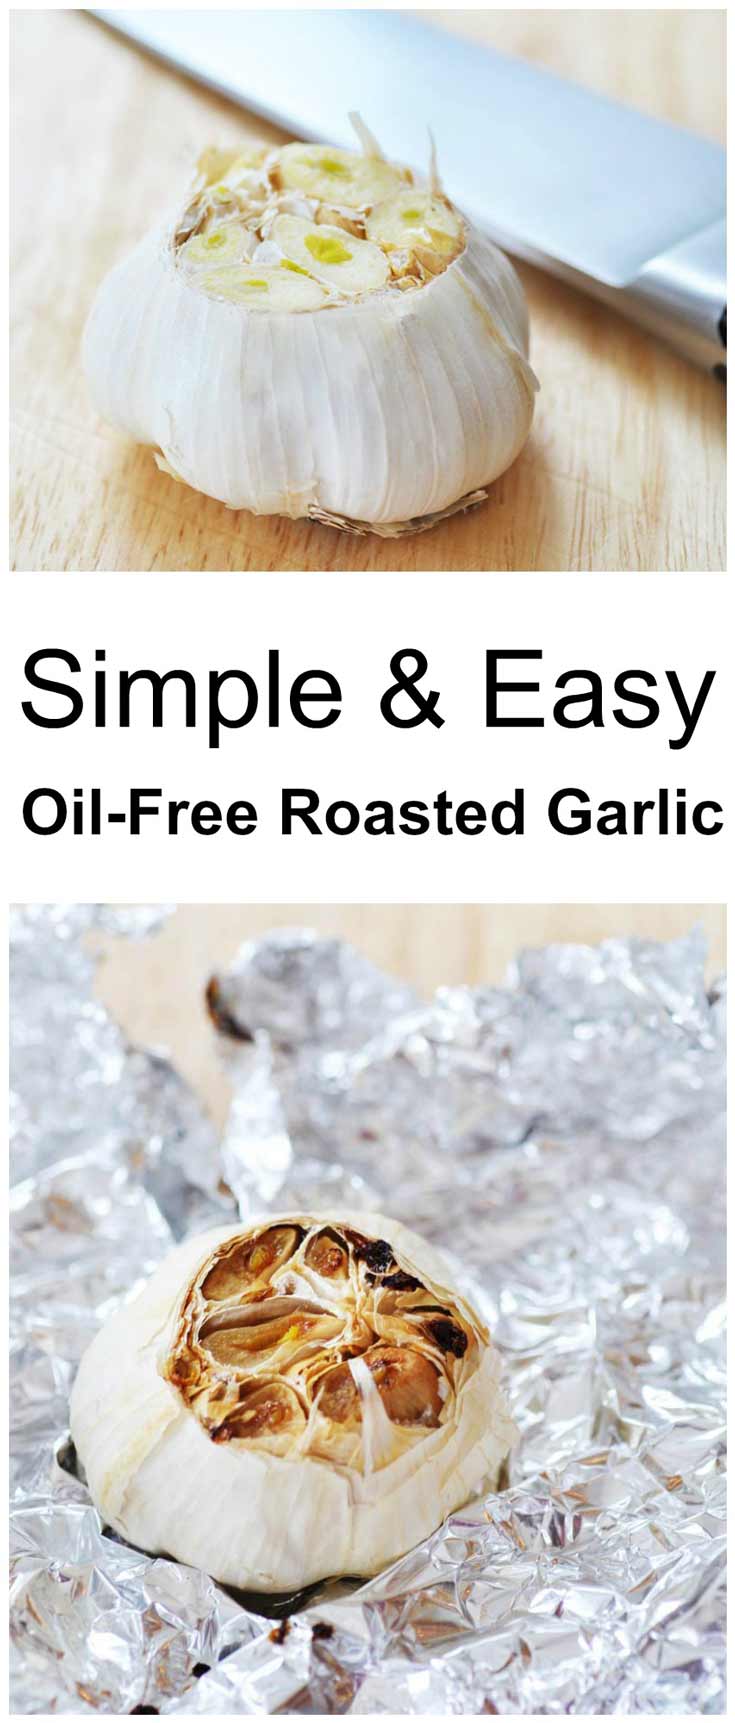 Simple and Easy Oil-Free Roasted Garlic! This is so easy even the most timid cook can make it. Oil-free recipe to make it even healthier. www.veganosity.com